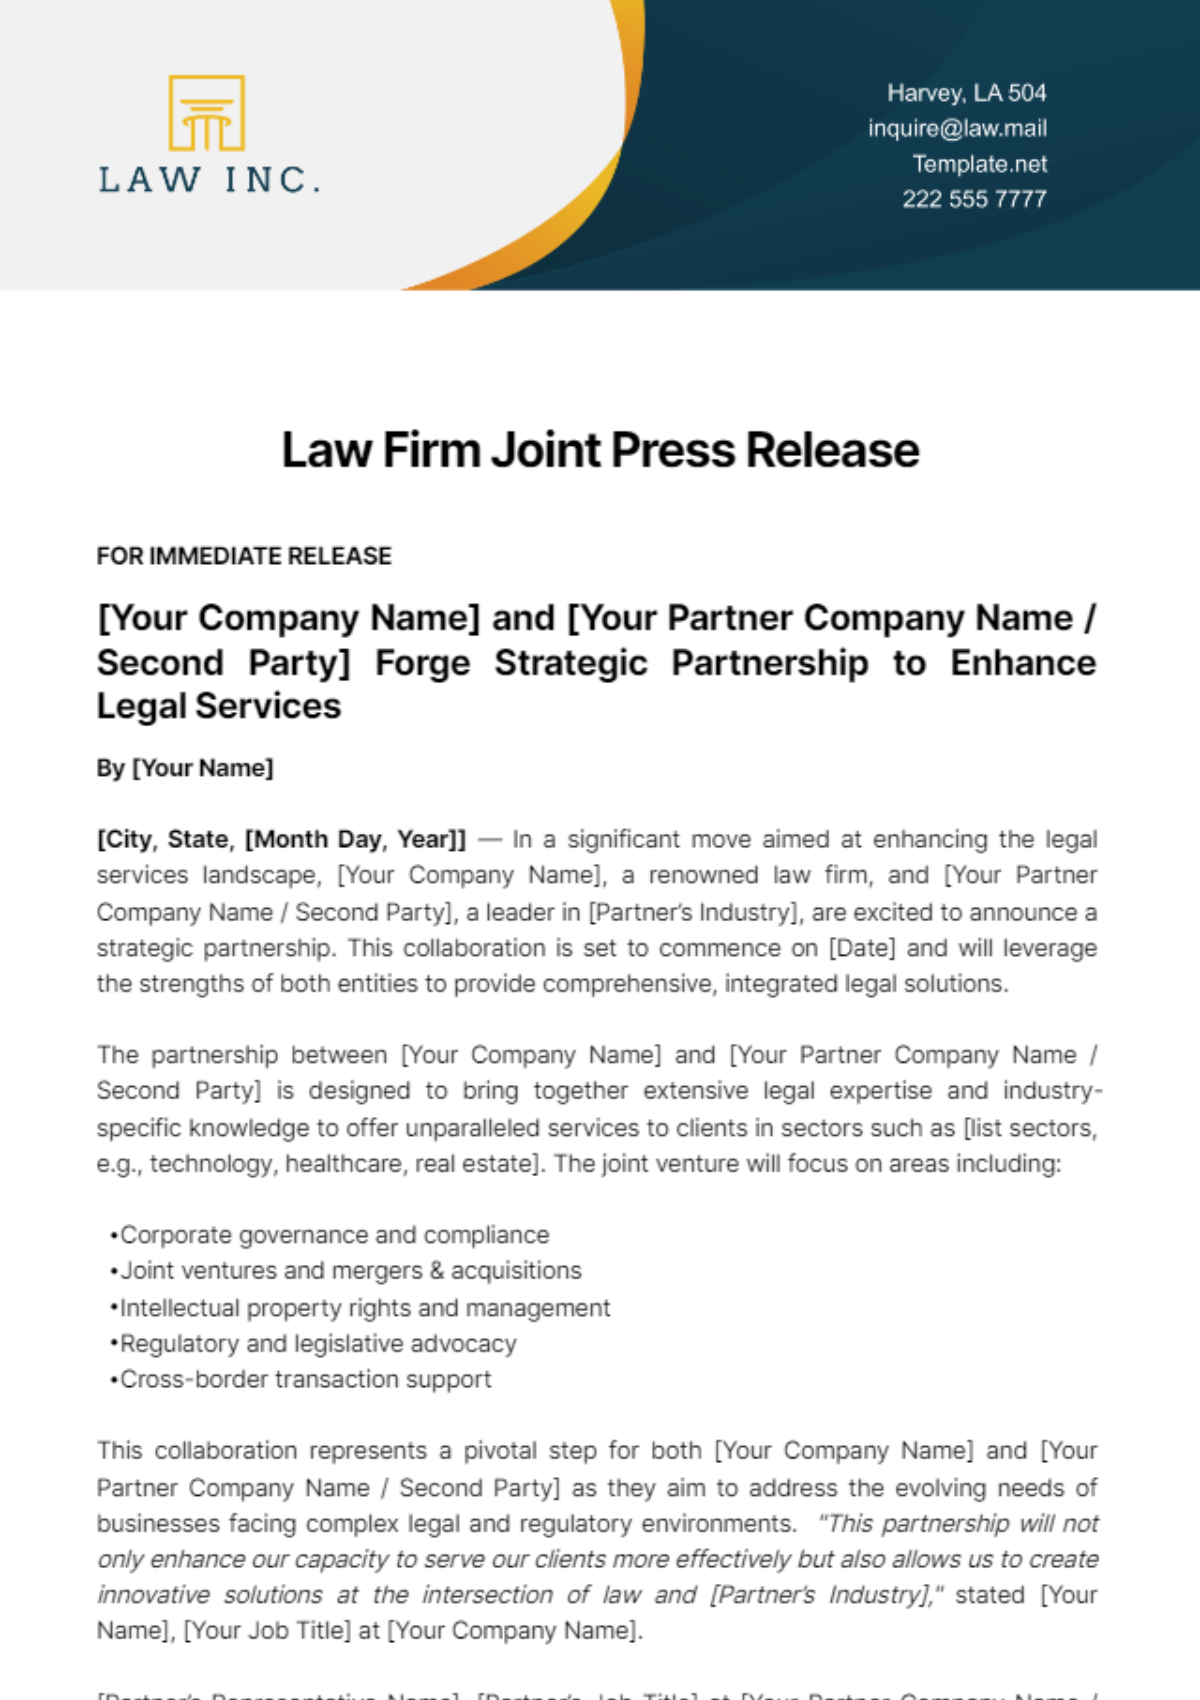 Free Law Firm Joint Press Release Template